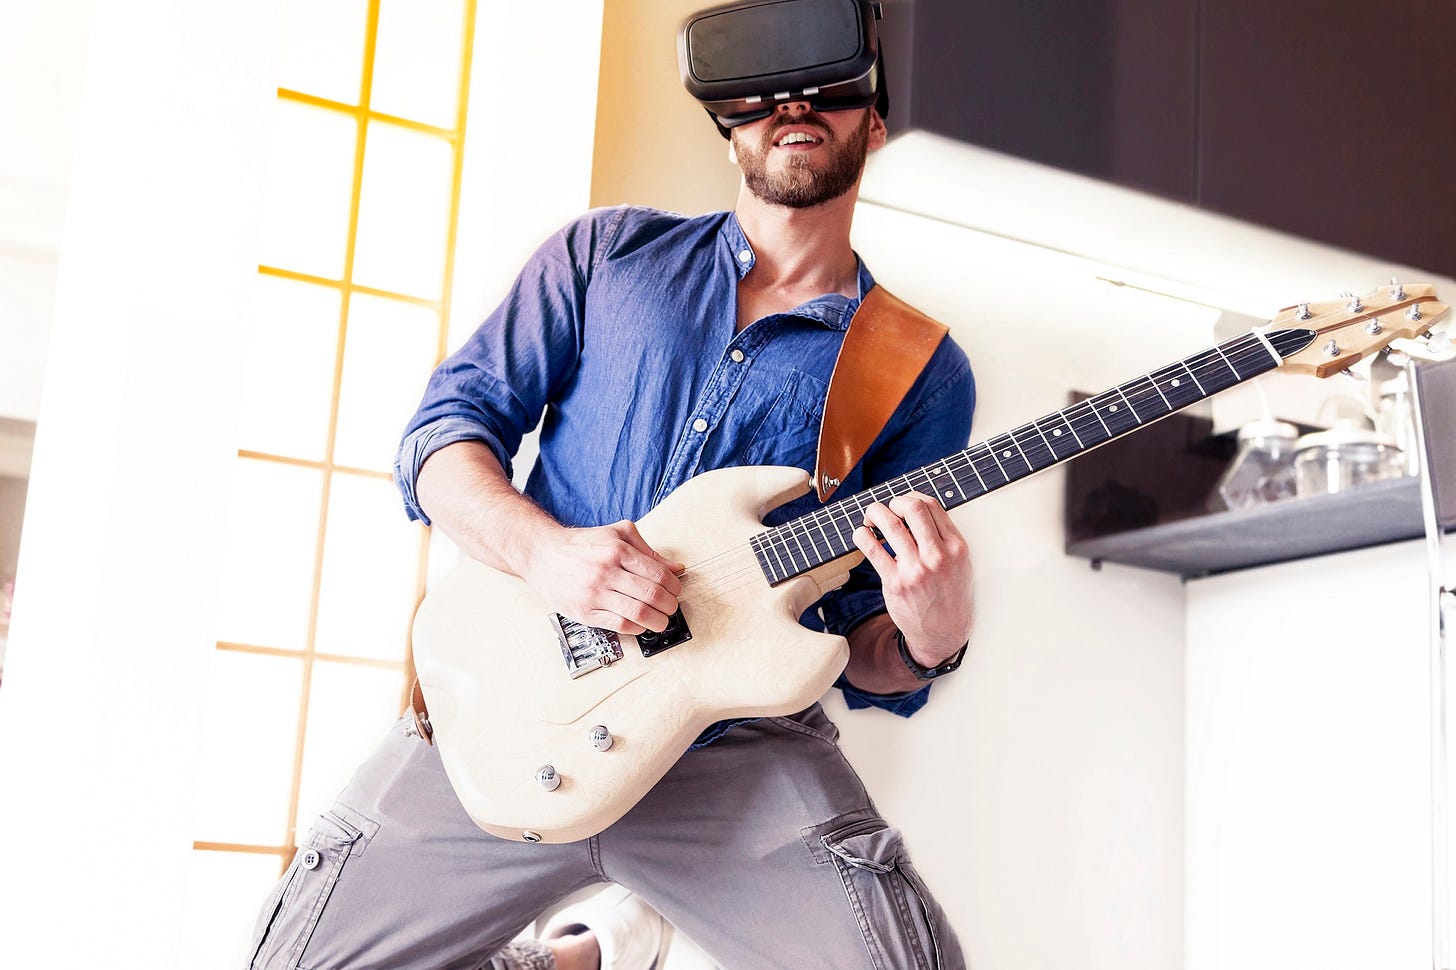 The 5 Best Virtual Reality Music Experiences You Must Try | ARPost